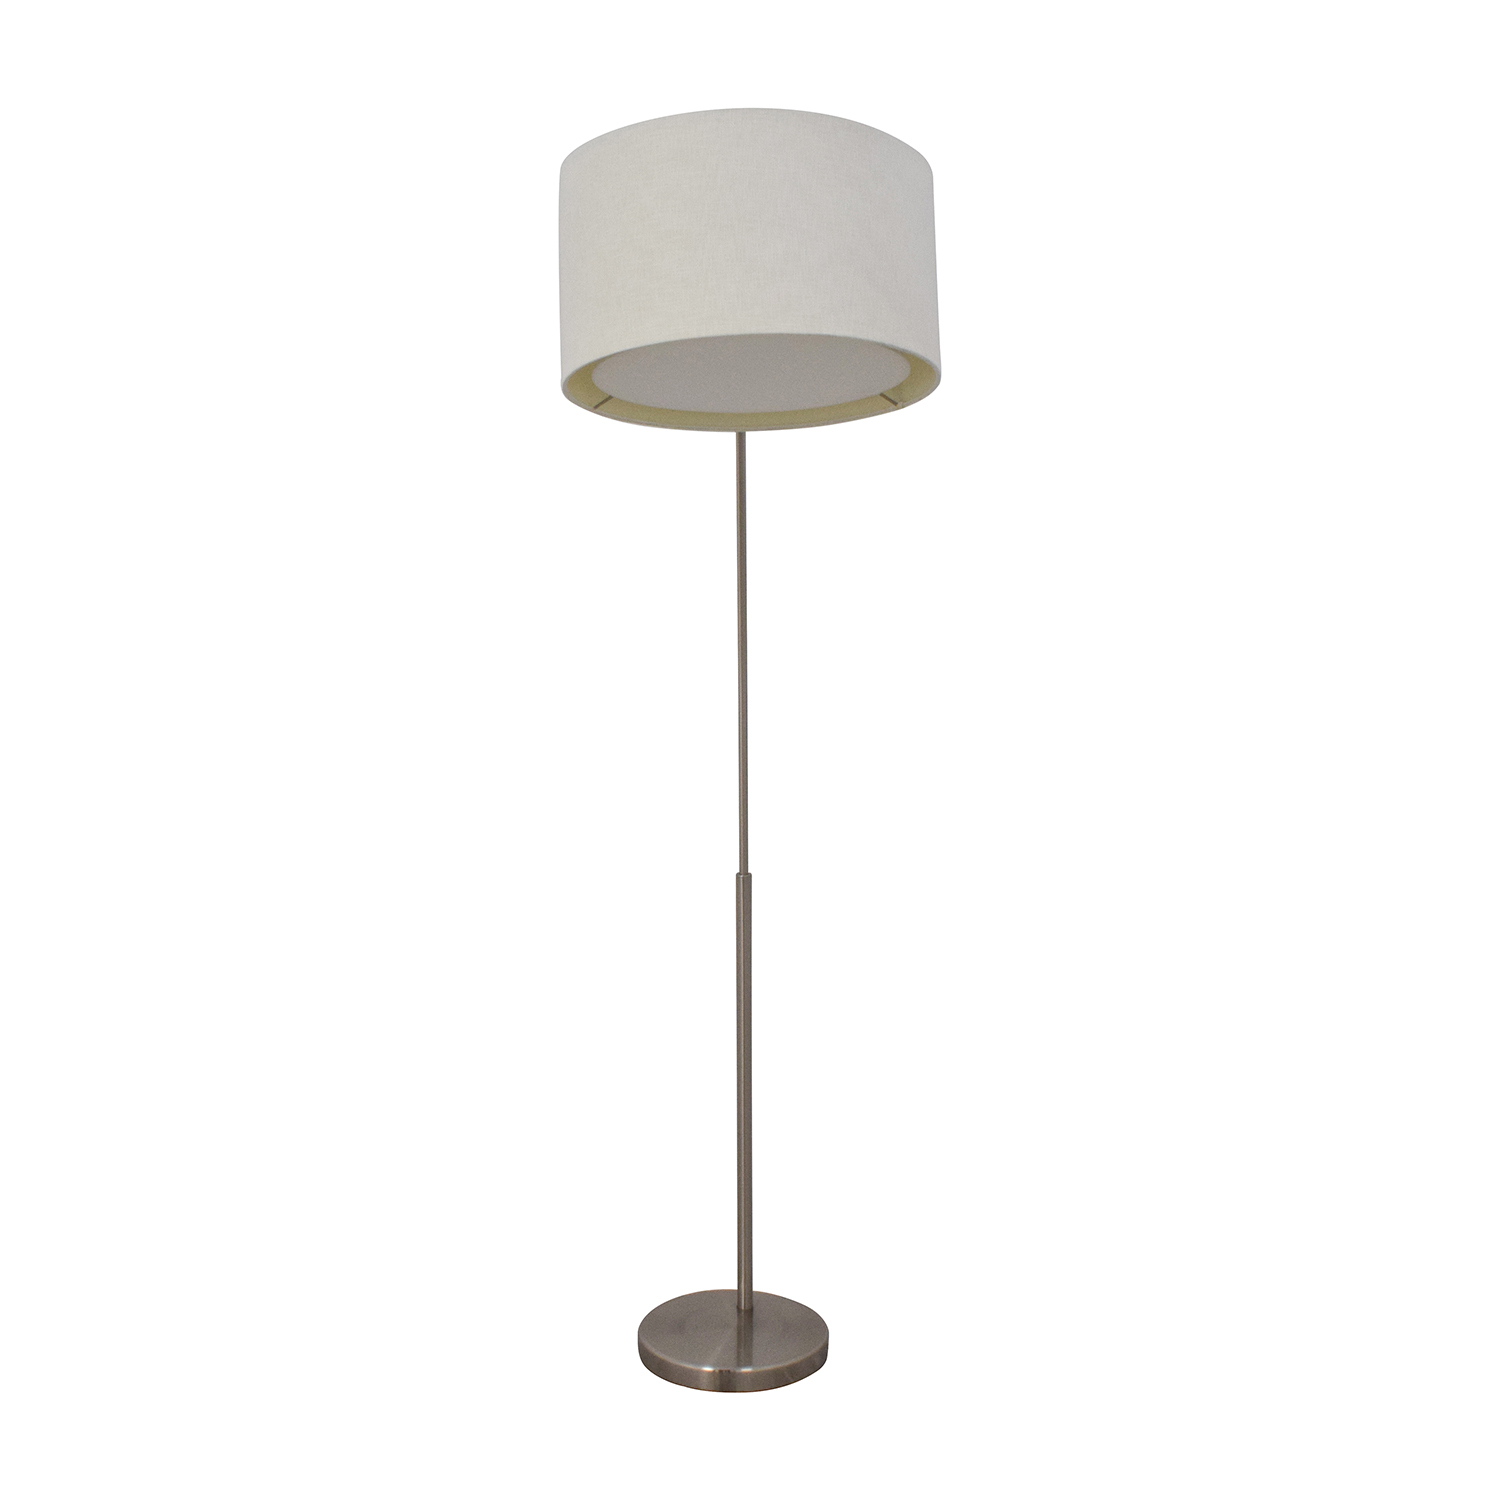 Lamps Dramatic Cb2 Arc Lamp For Home Ideas Lvivairport with regard to sizing 1500 X 1500